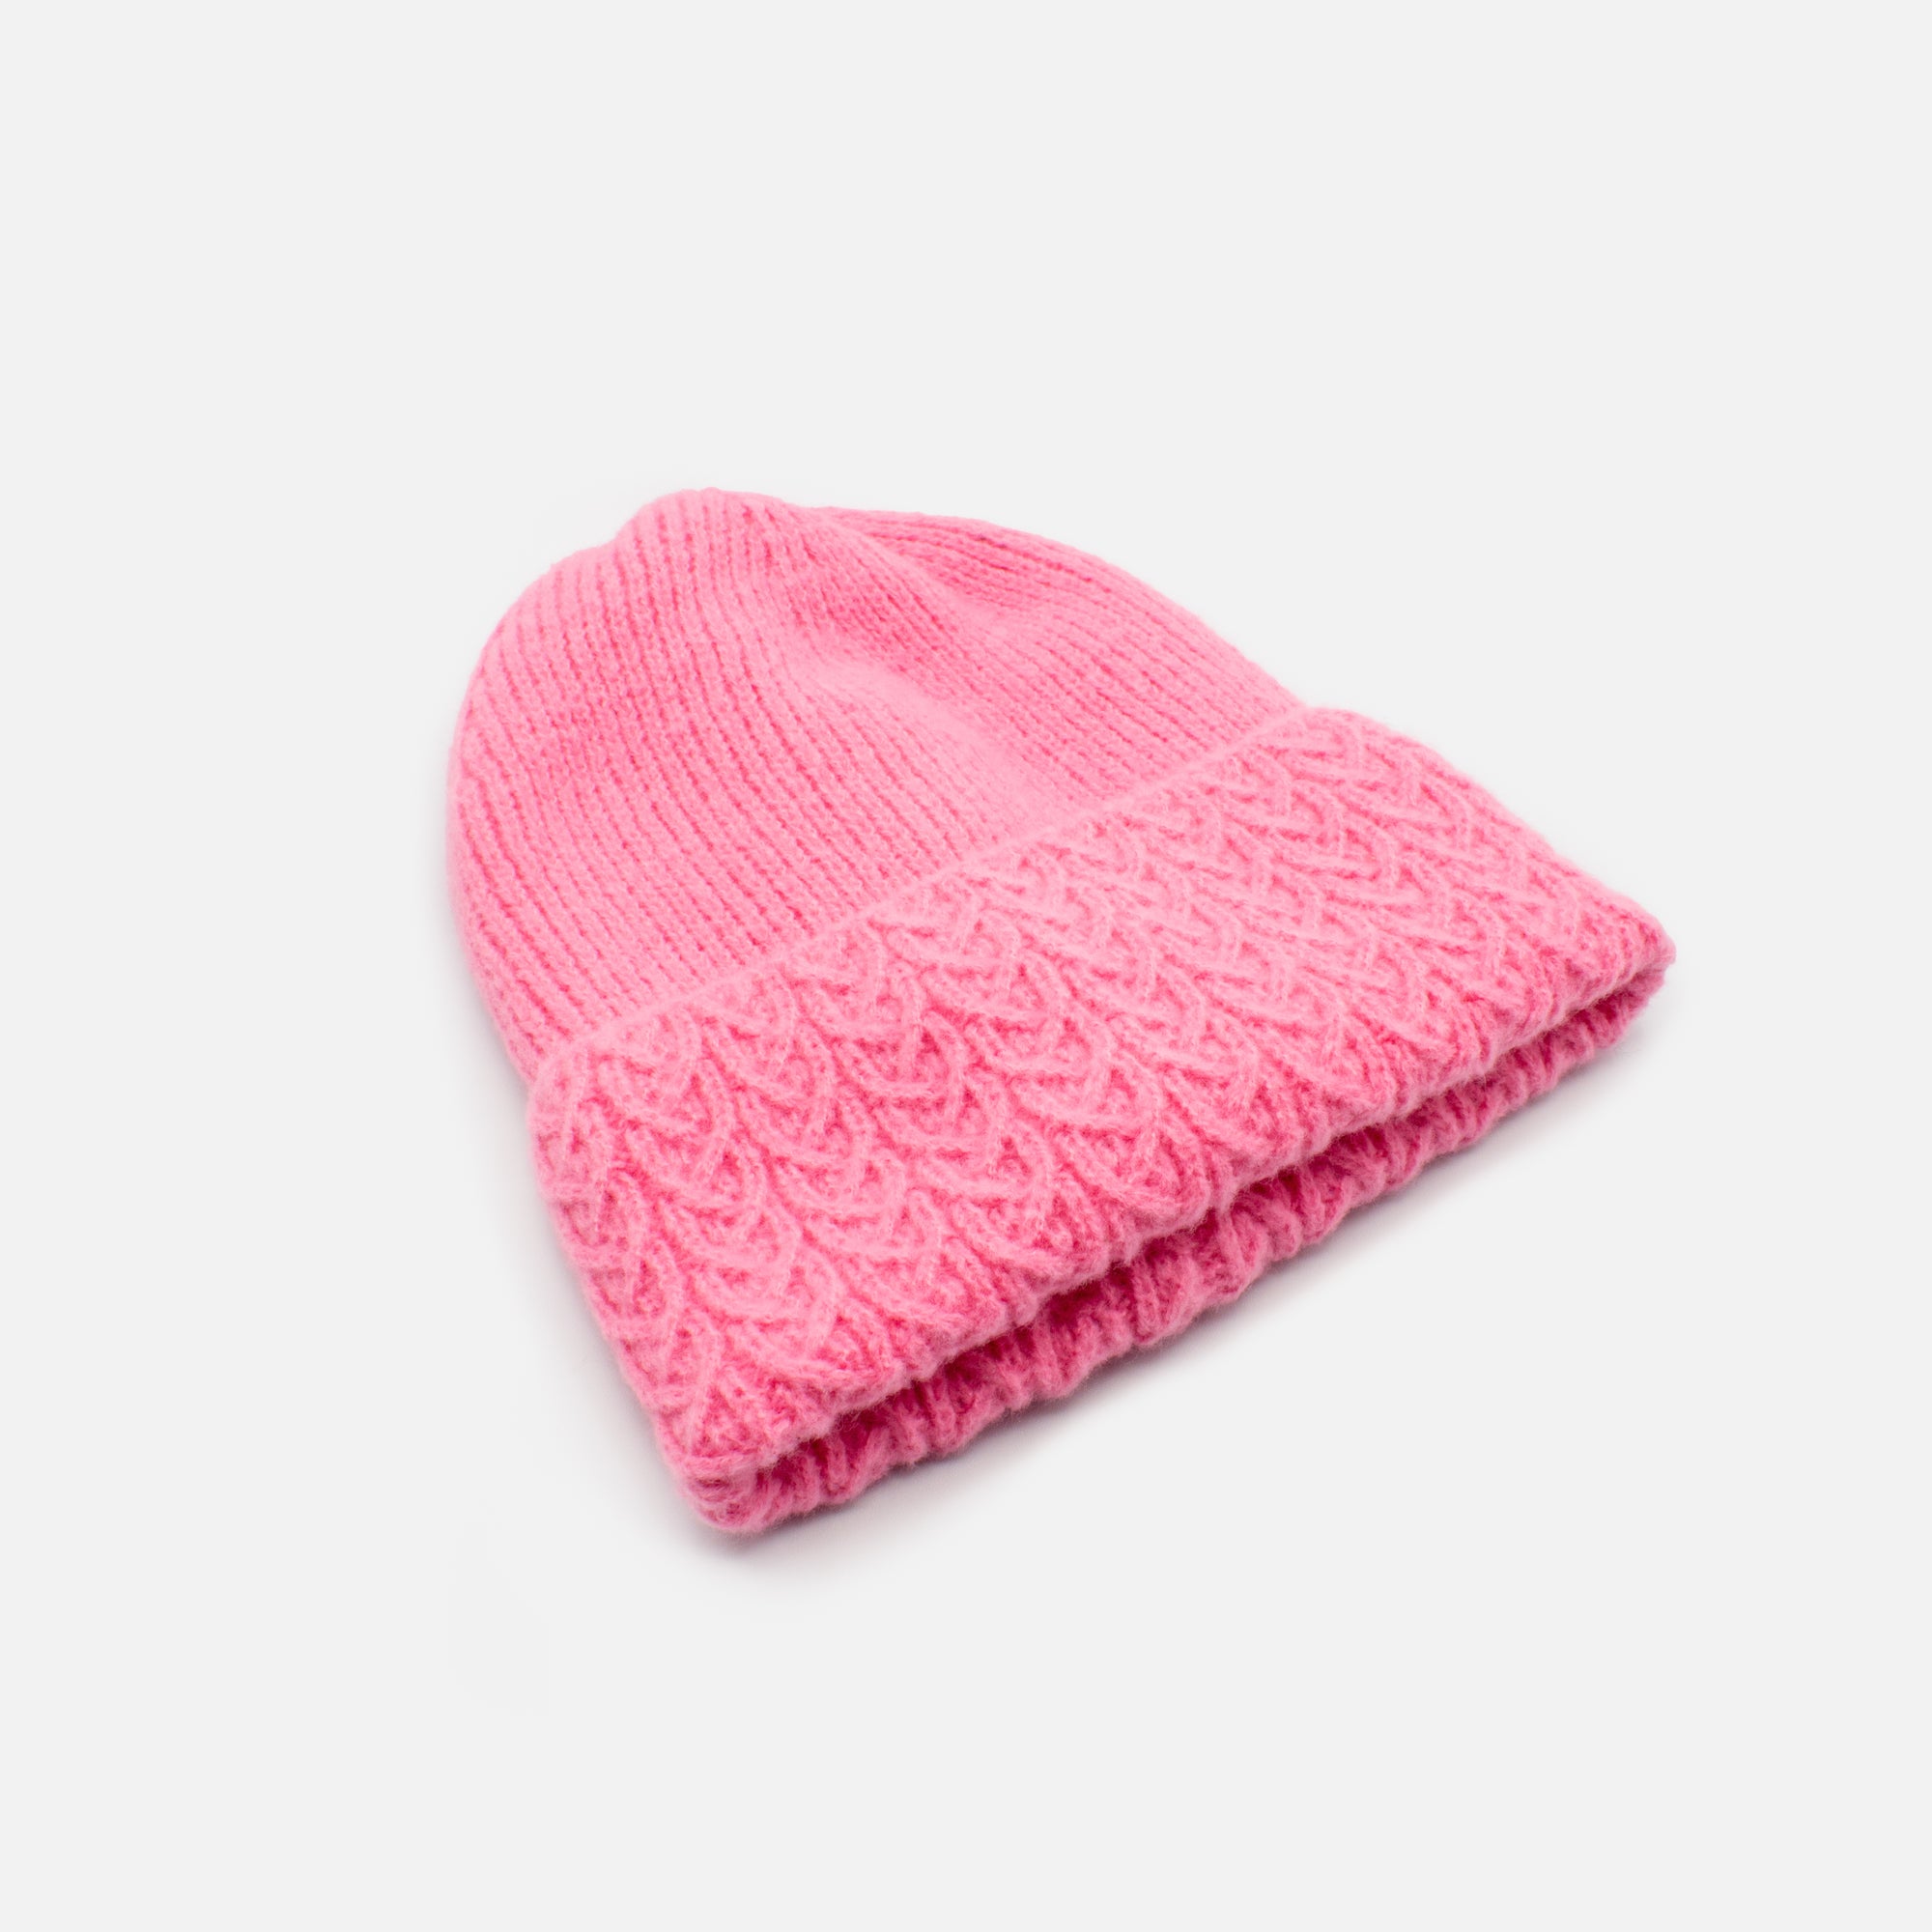 Pink knit beanie with braided flap